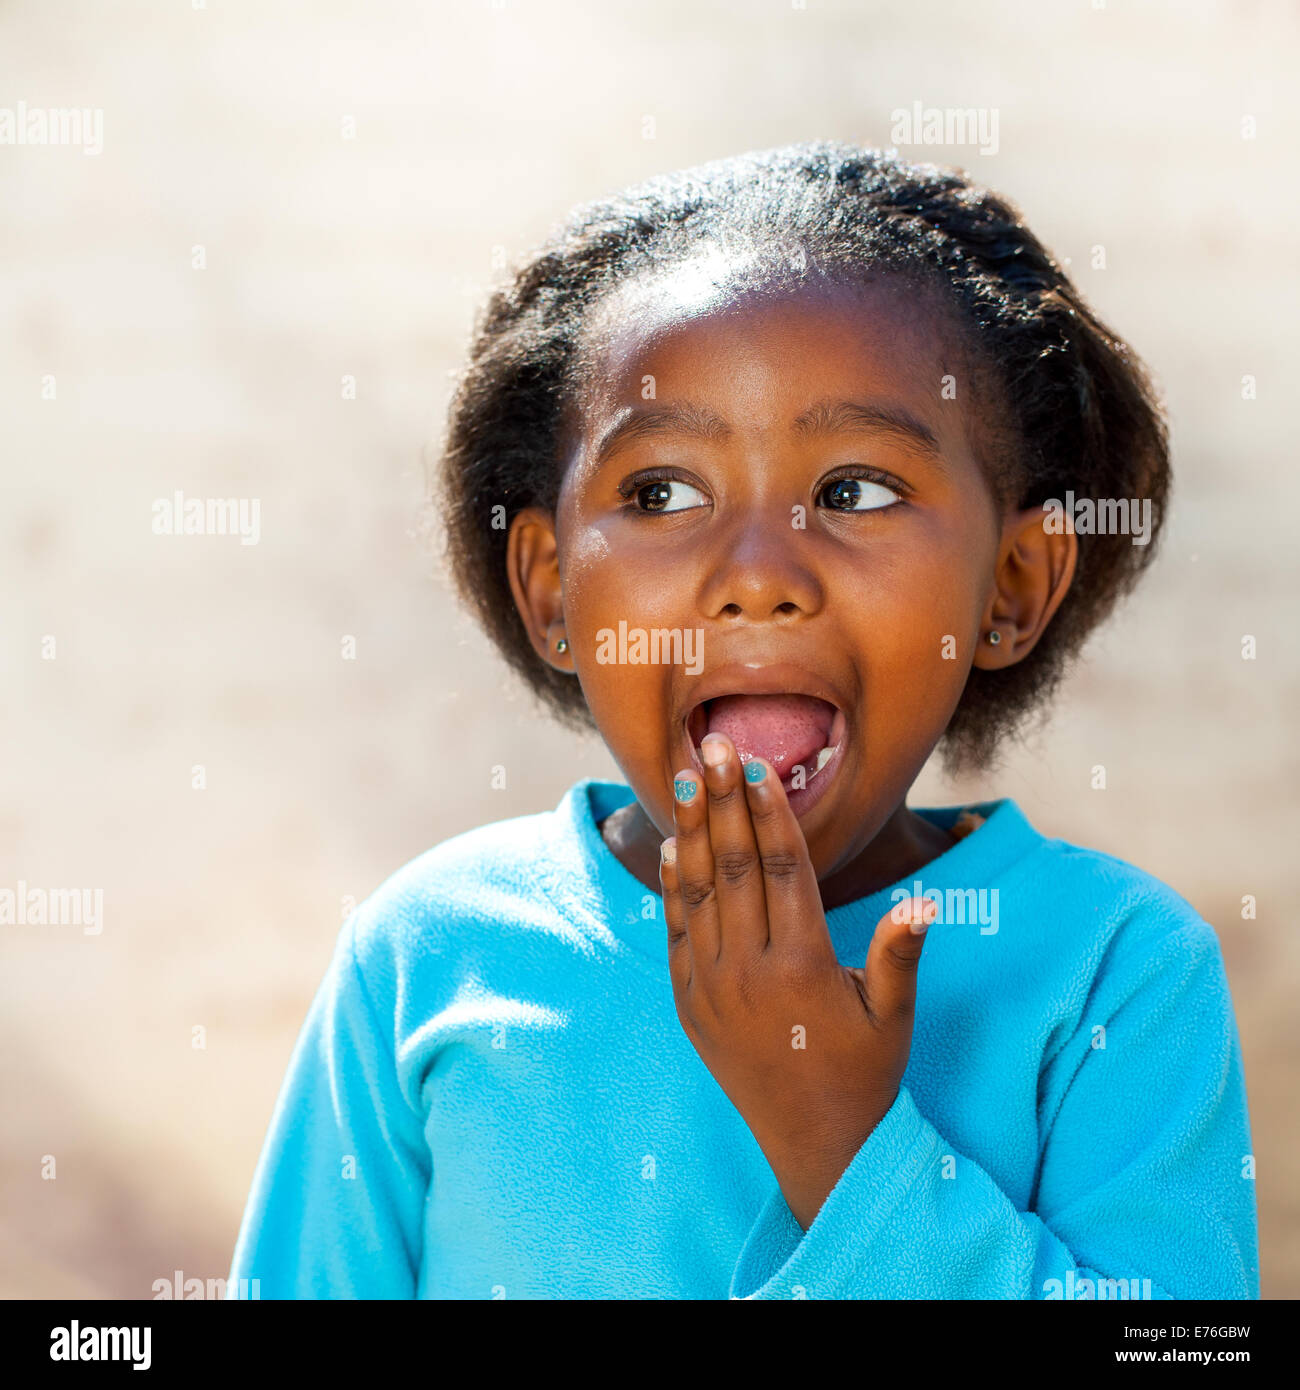 Close up portrait of little African girl with surprised face expression. Stock Photo